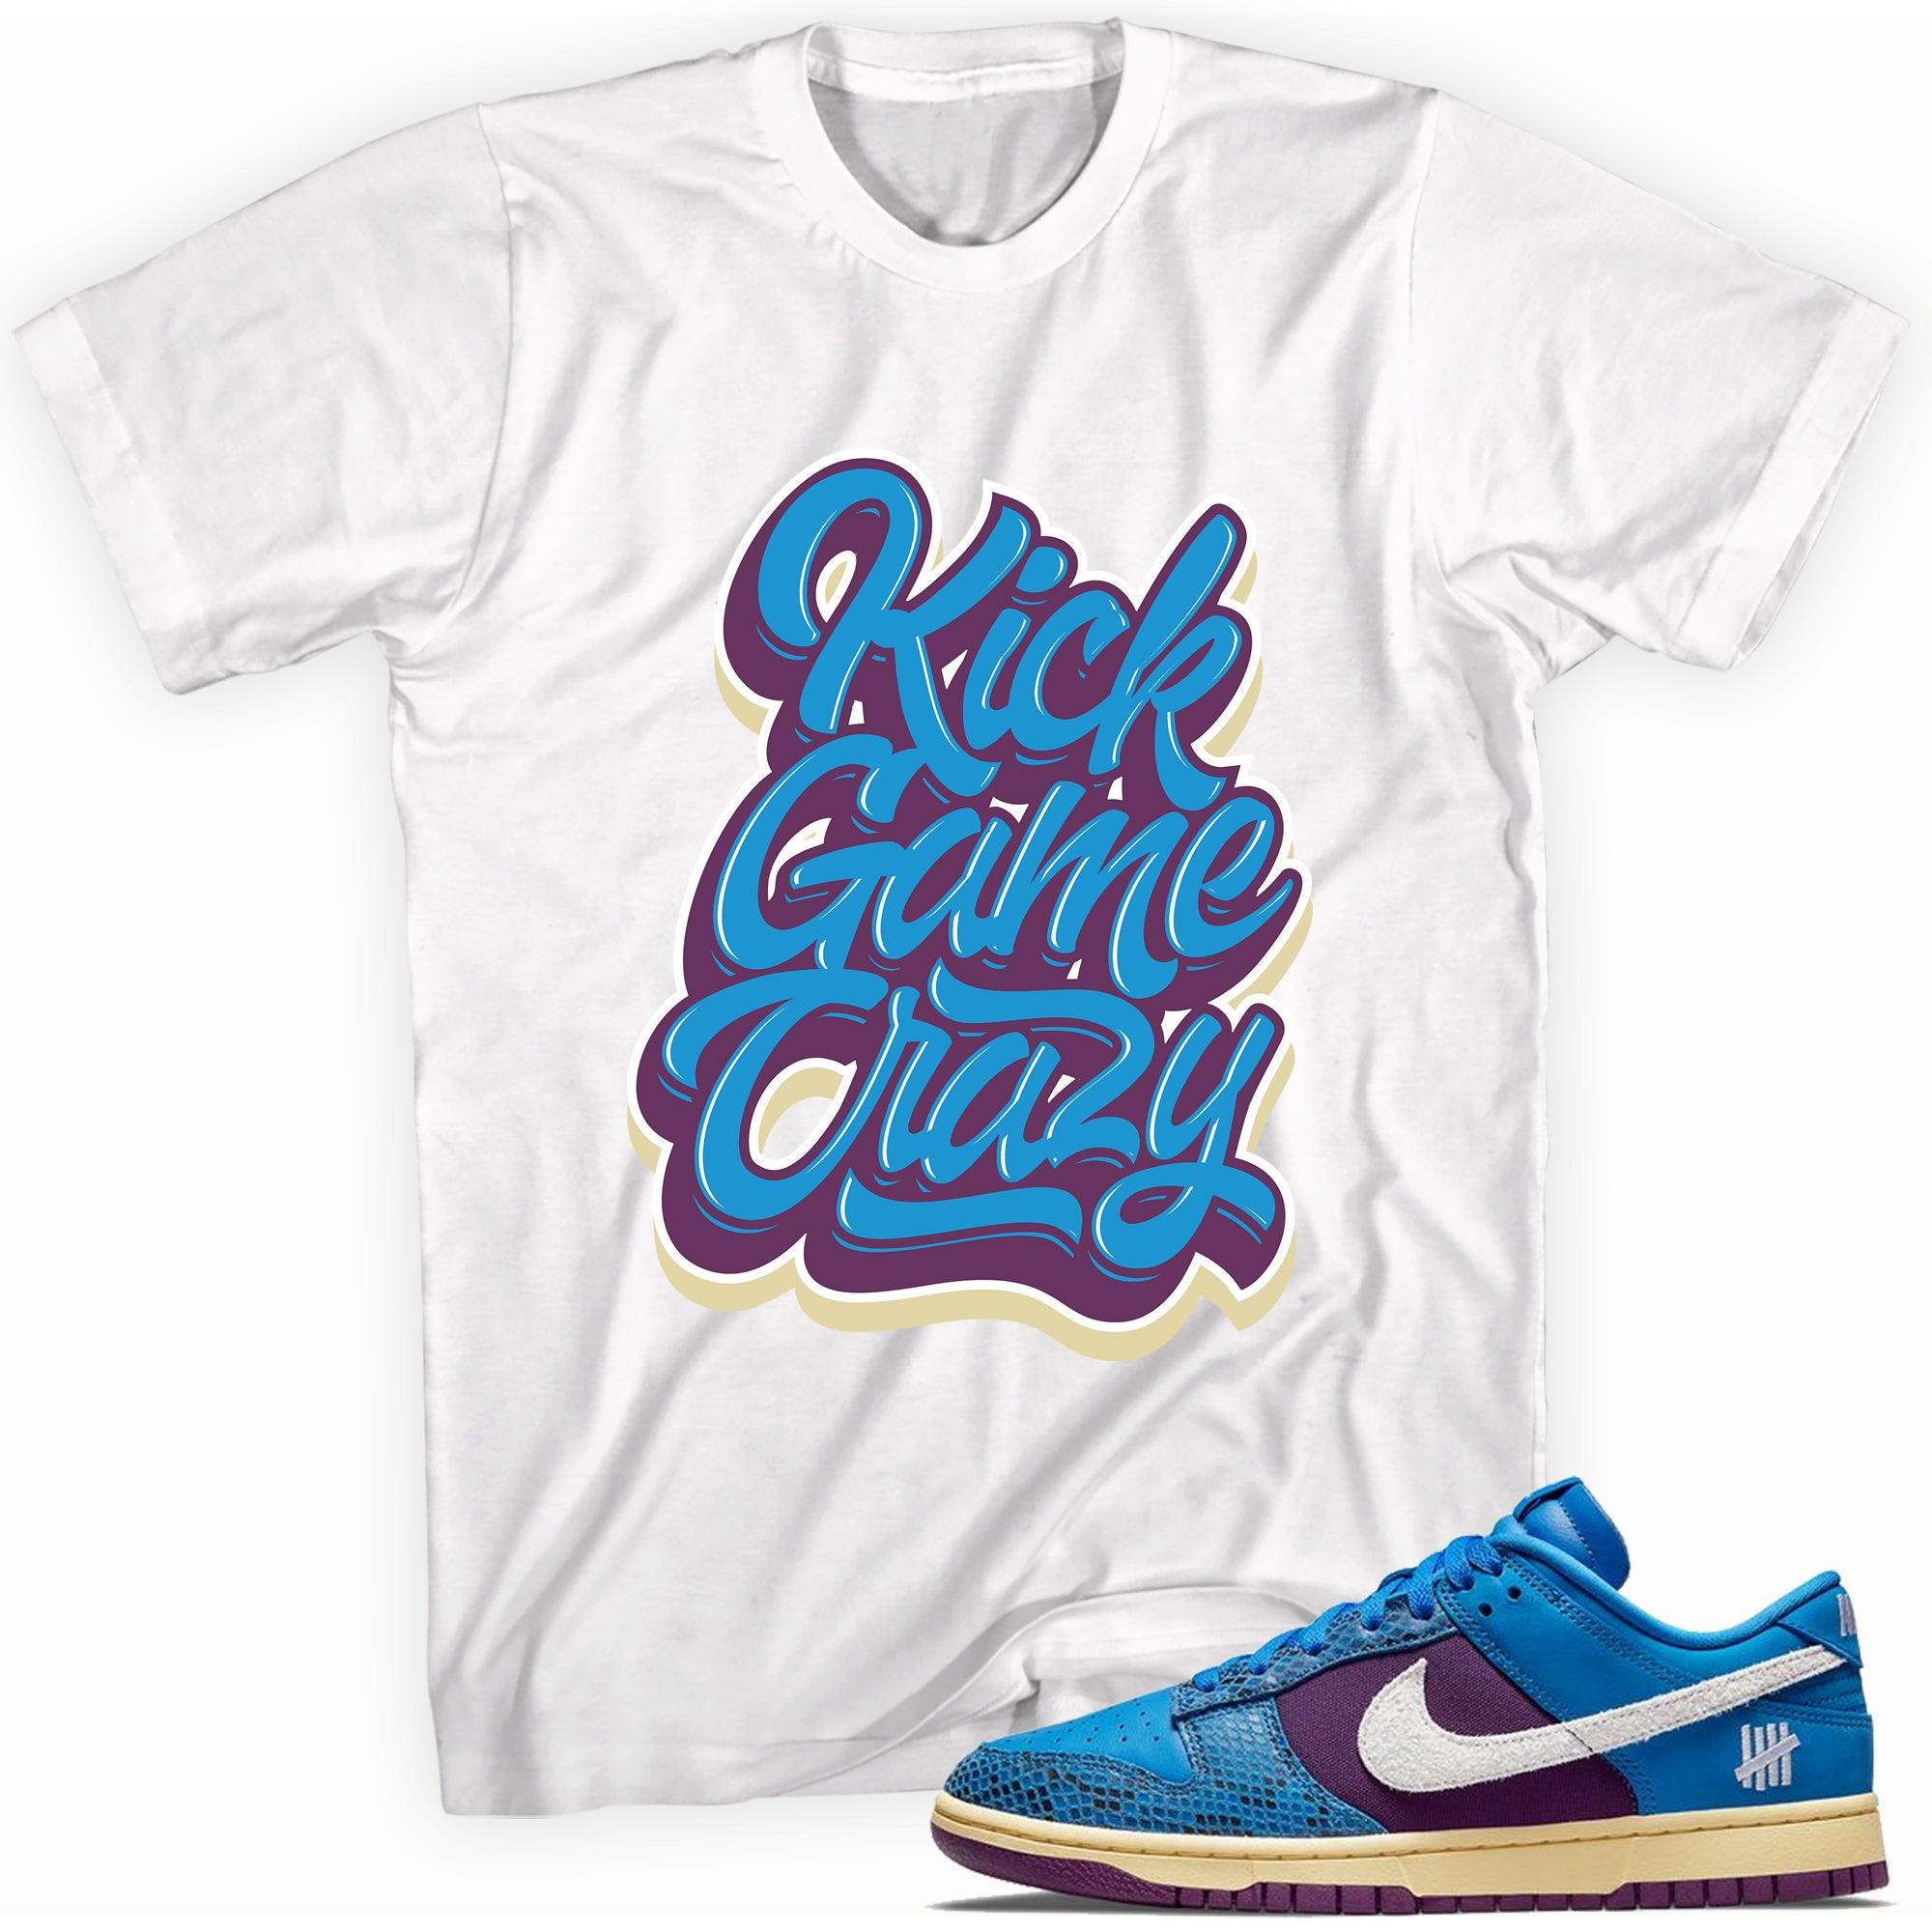 Kick Game Crazy Shirt Nike Dunk Low Undefeated 5 On It Dunk vs AF1 Sneakers photo